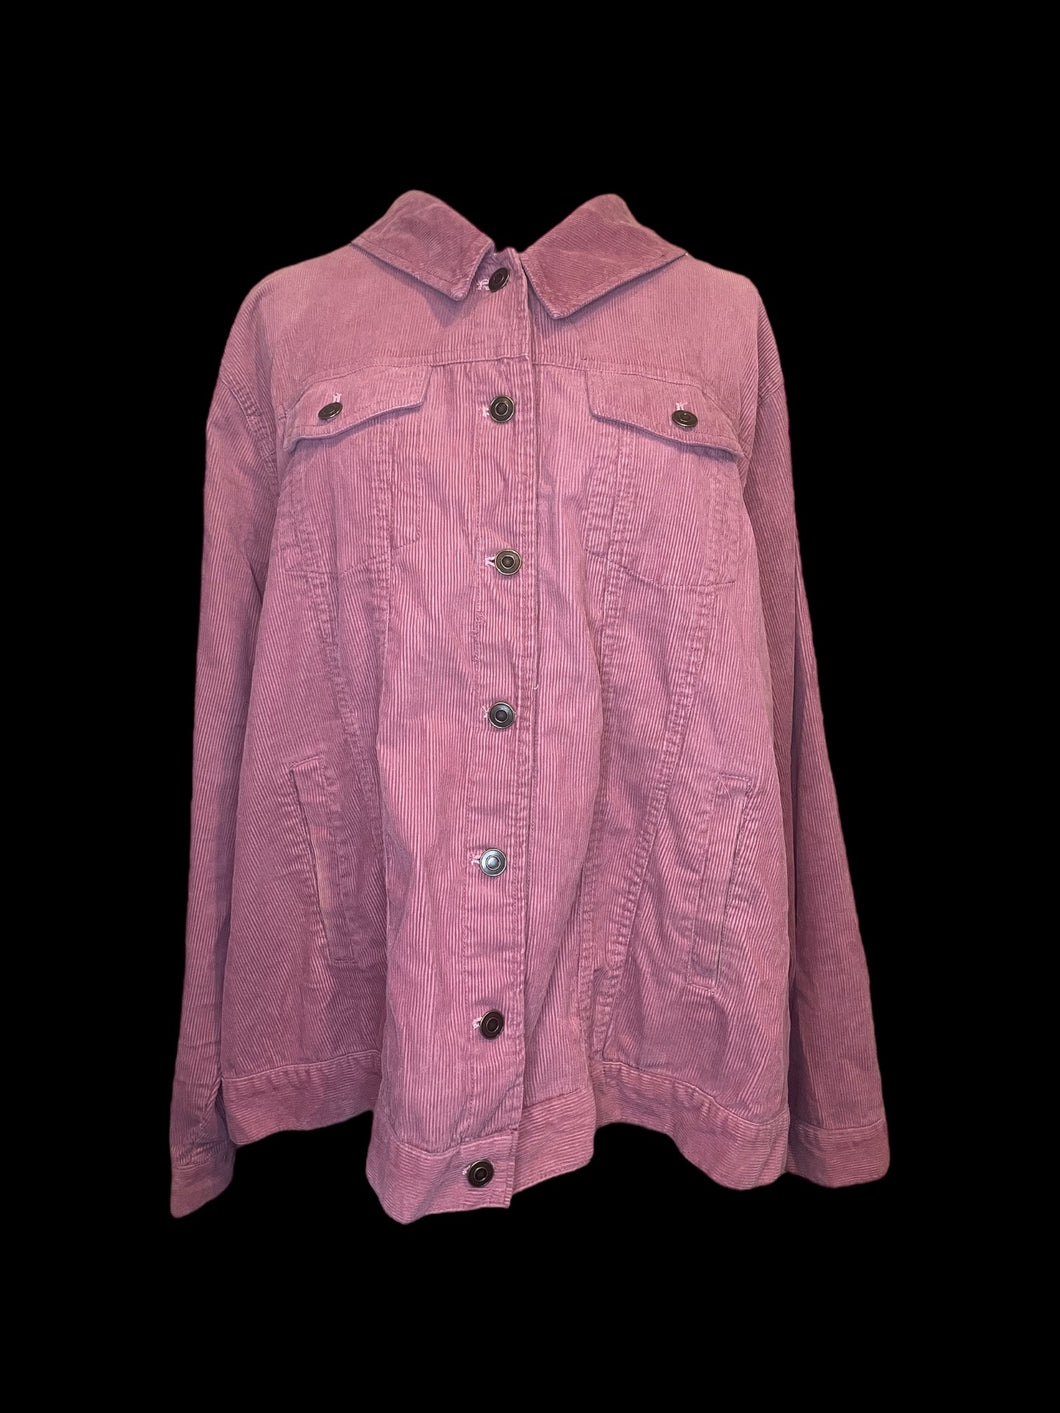 2X Dusty rose cotton corduroy long sleeve button down jacket w/ folded collar, button cuffs, & pockets